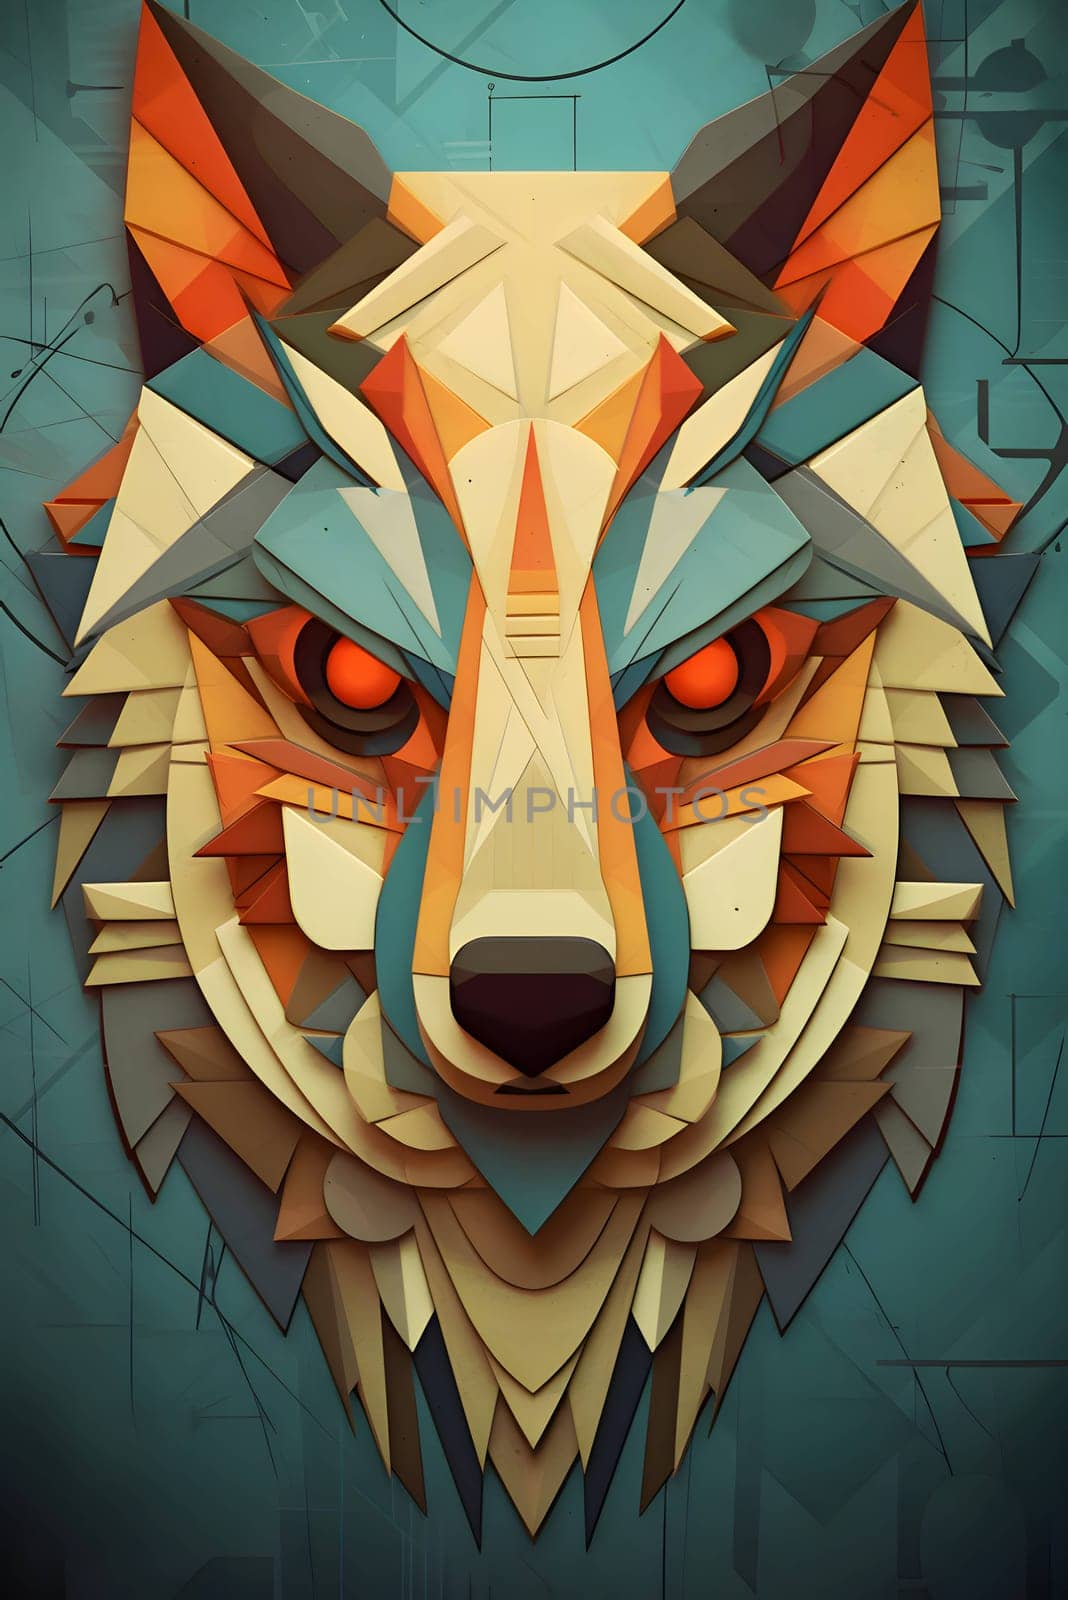 Abstract illustration: Abstract wolf head on a background of geometric shapes. Vector illustration.